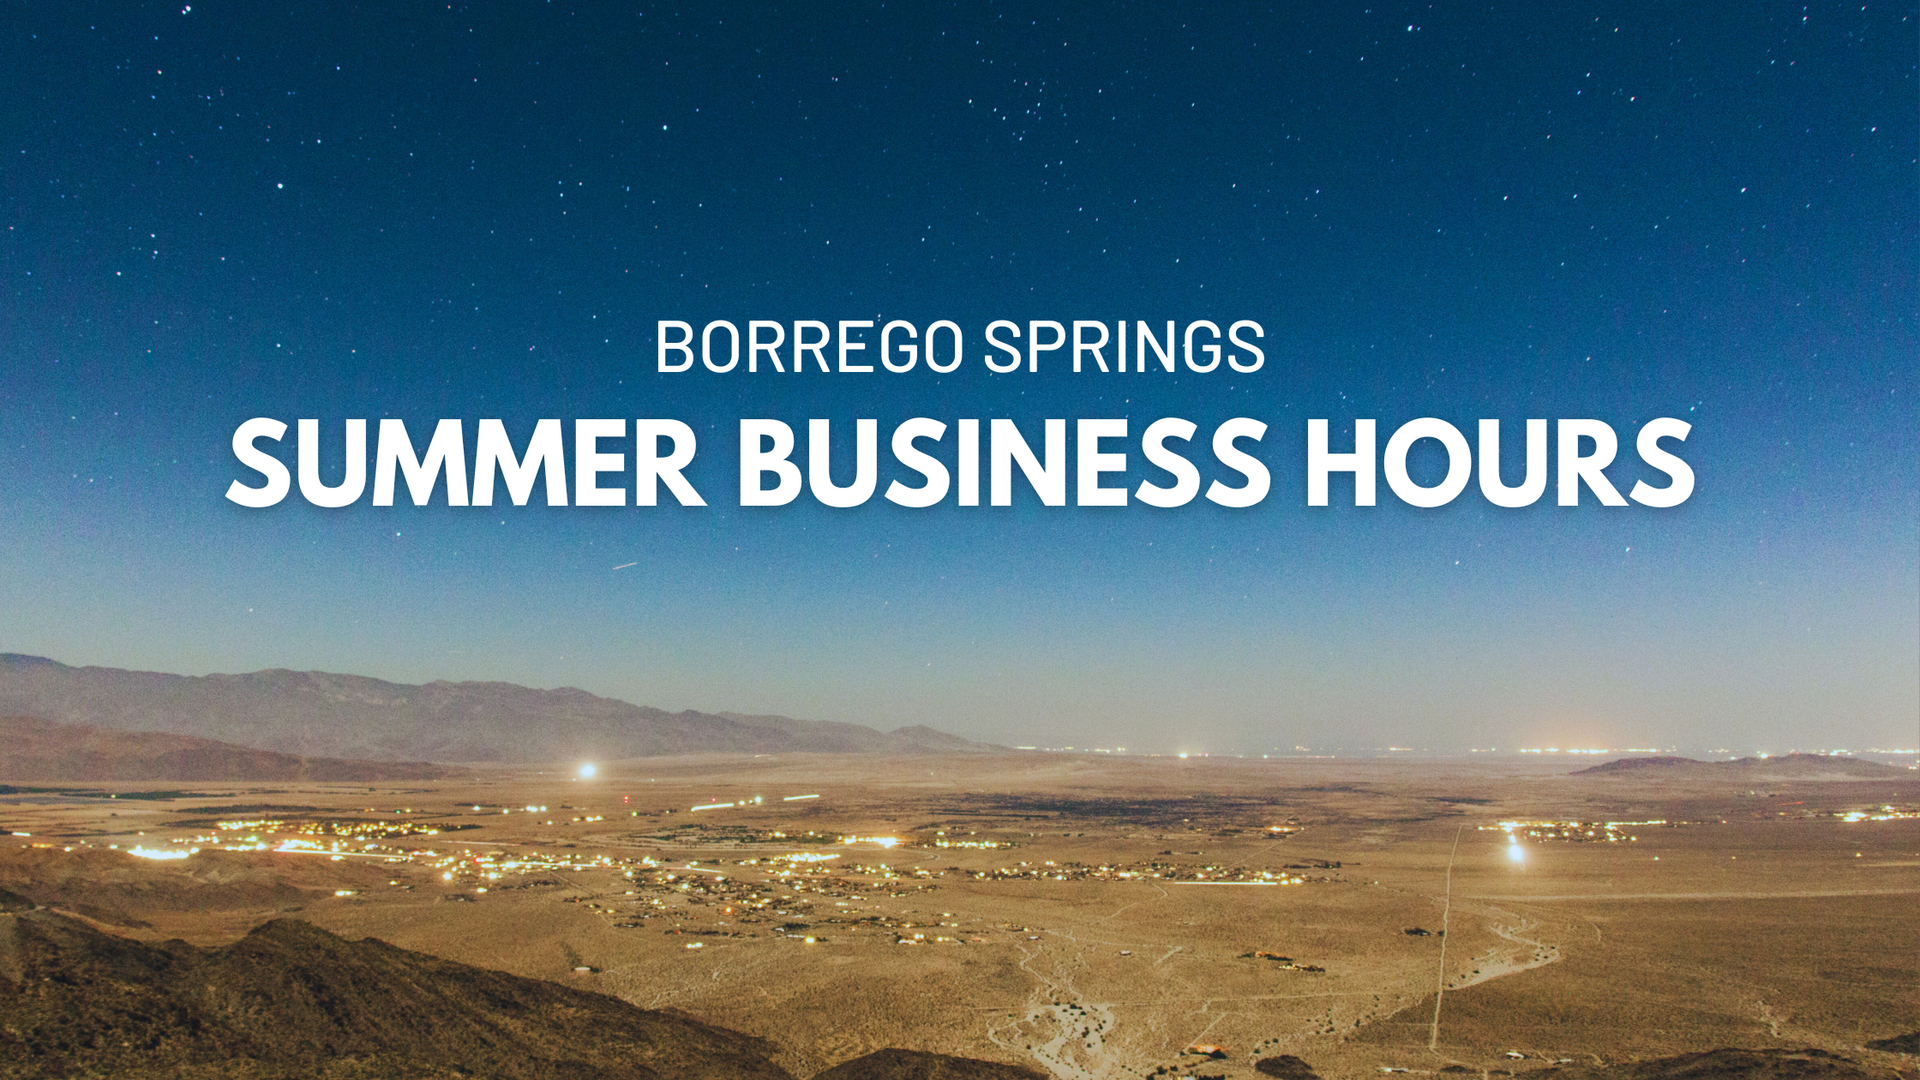 Check out summer business closures and updated hours for popular spots in Borrego Springs.